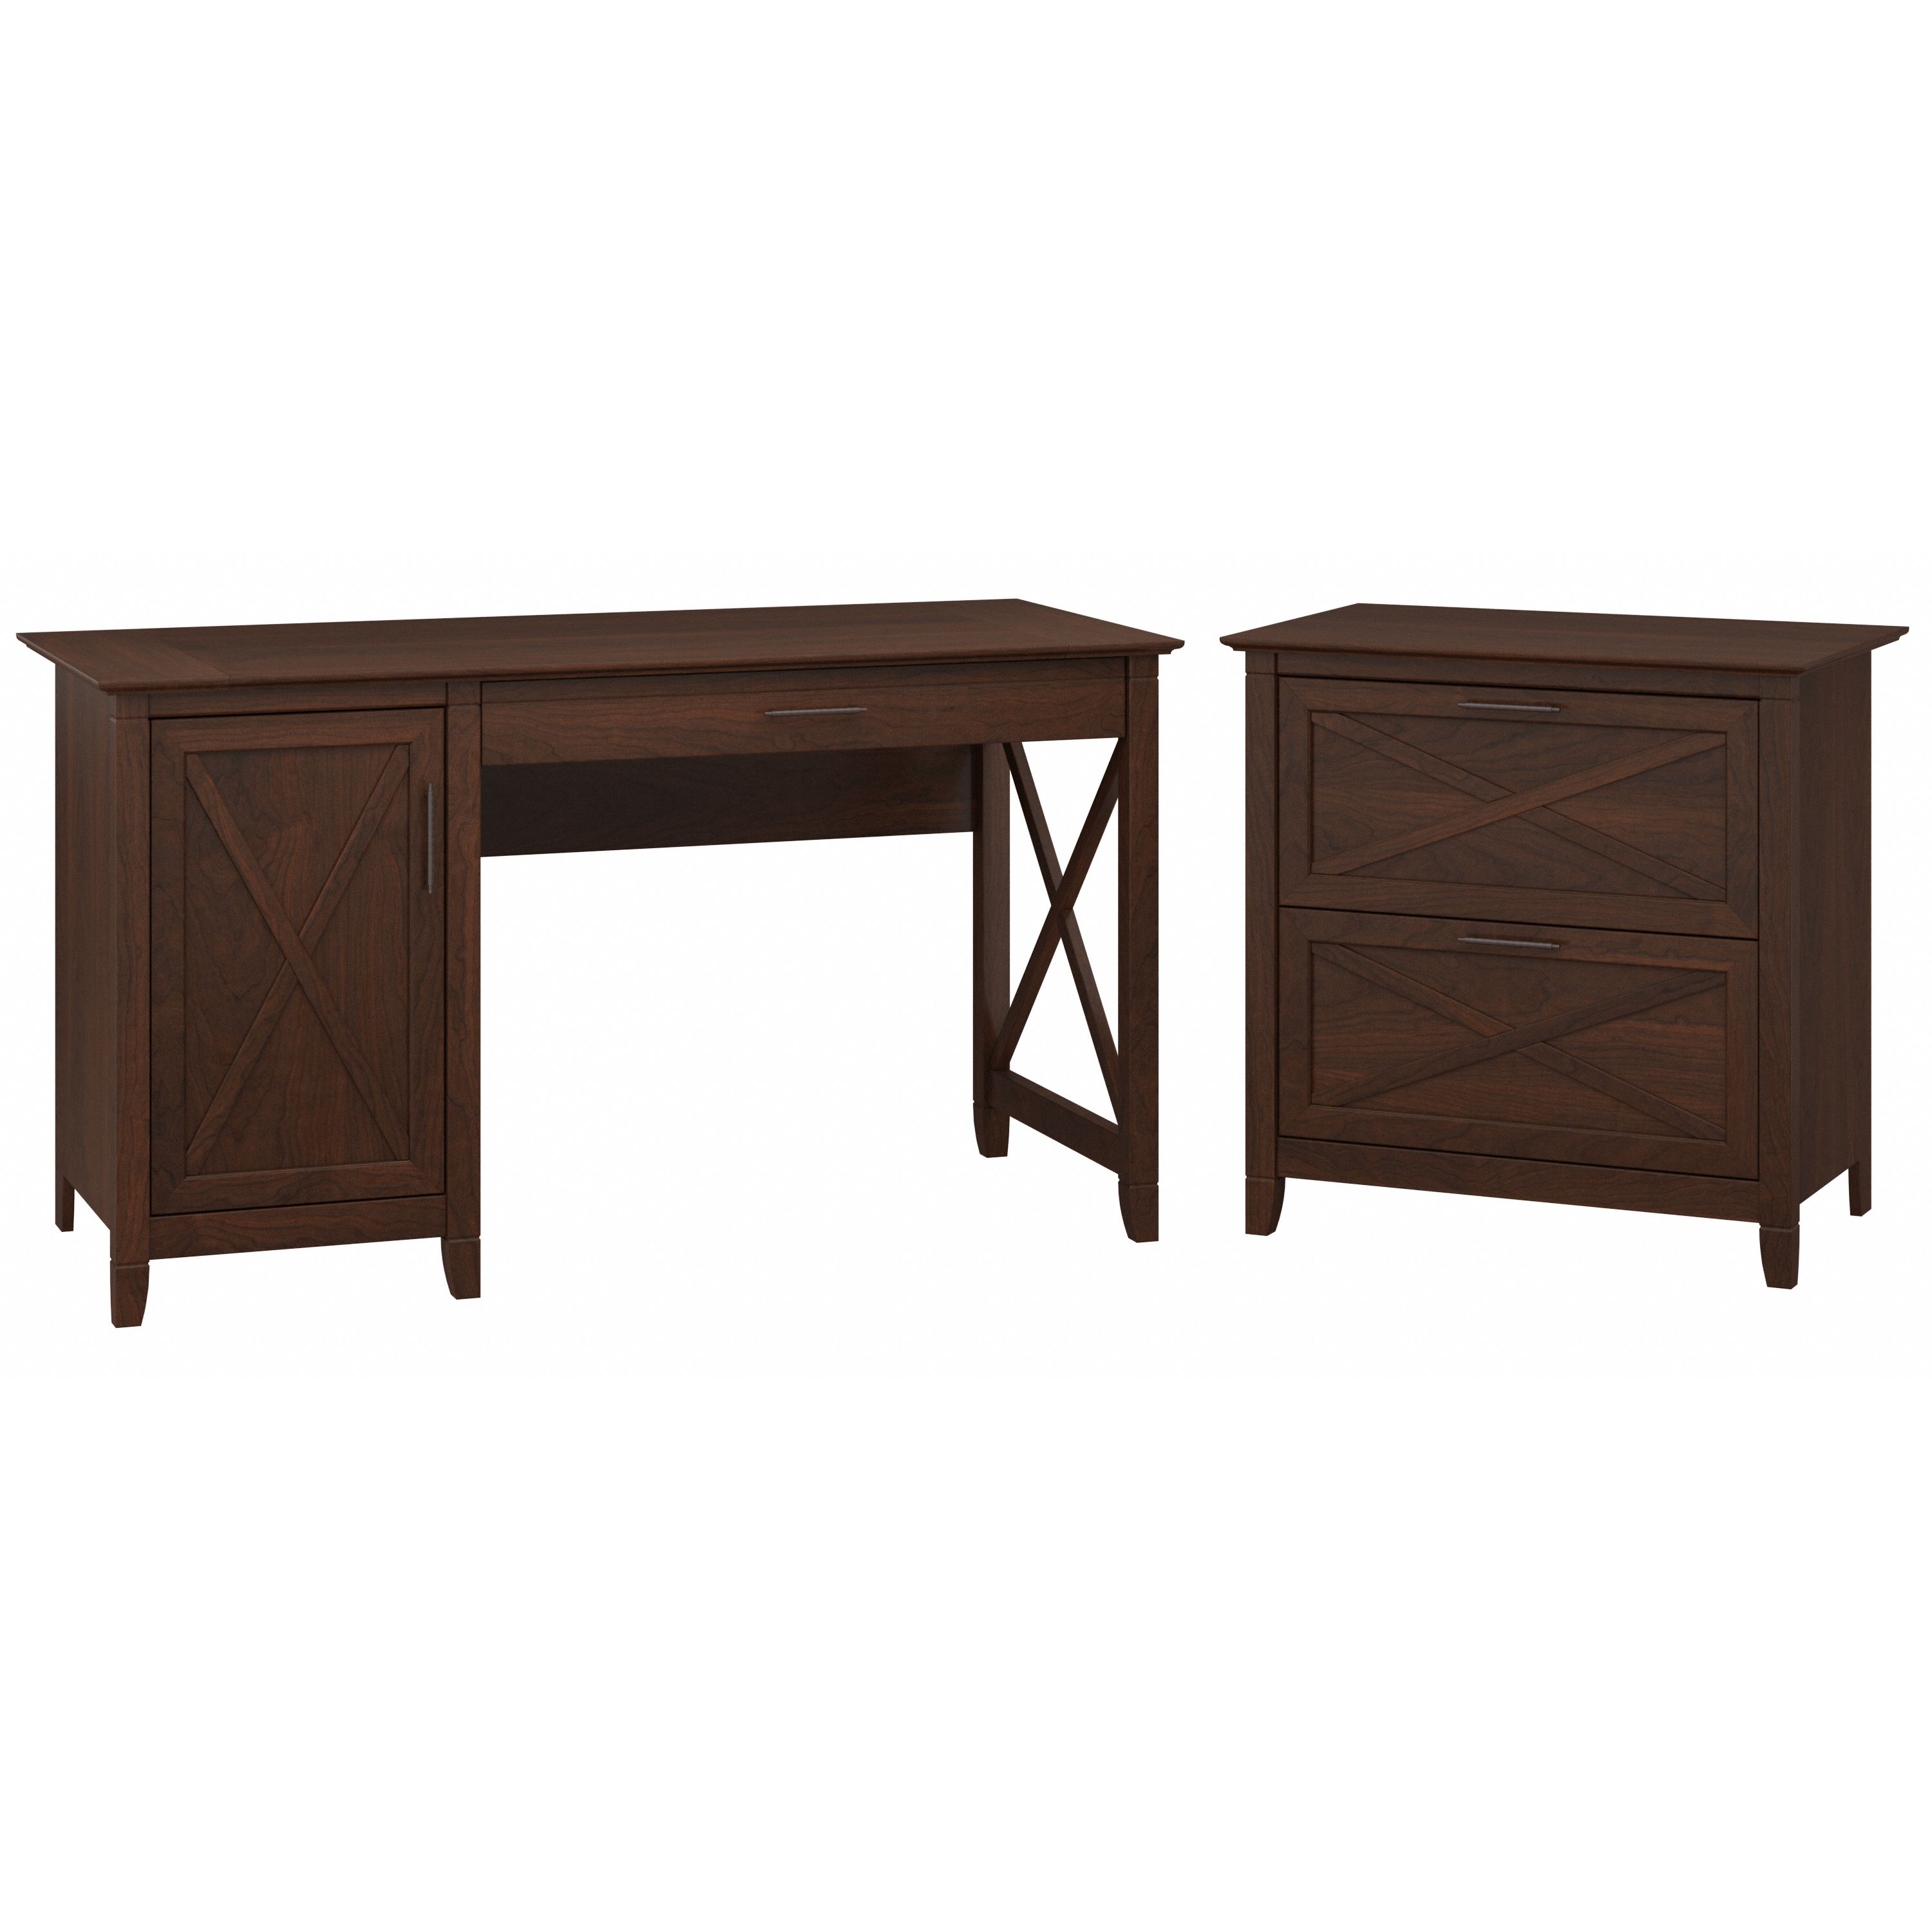 Shop Bush Furniture Key West 54W Computer Desk with Storage and 2 Drawer Lateral File Cabinet 02 KWS008BC #color_bing cherry